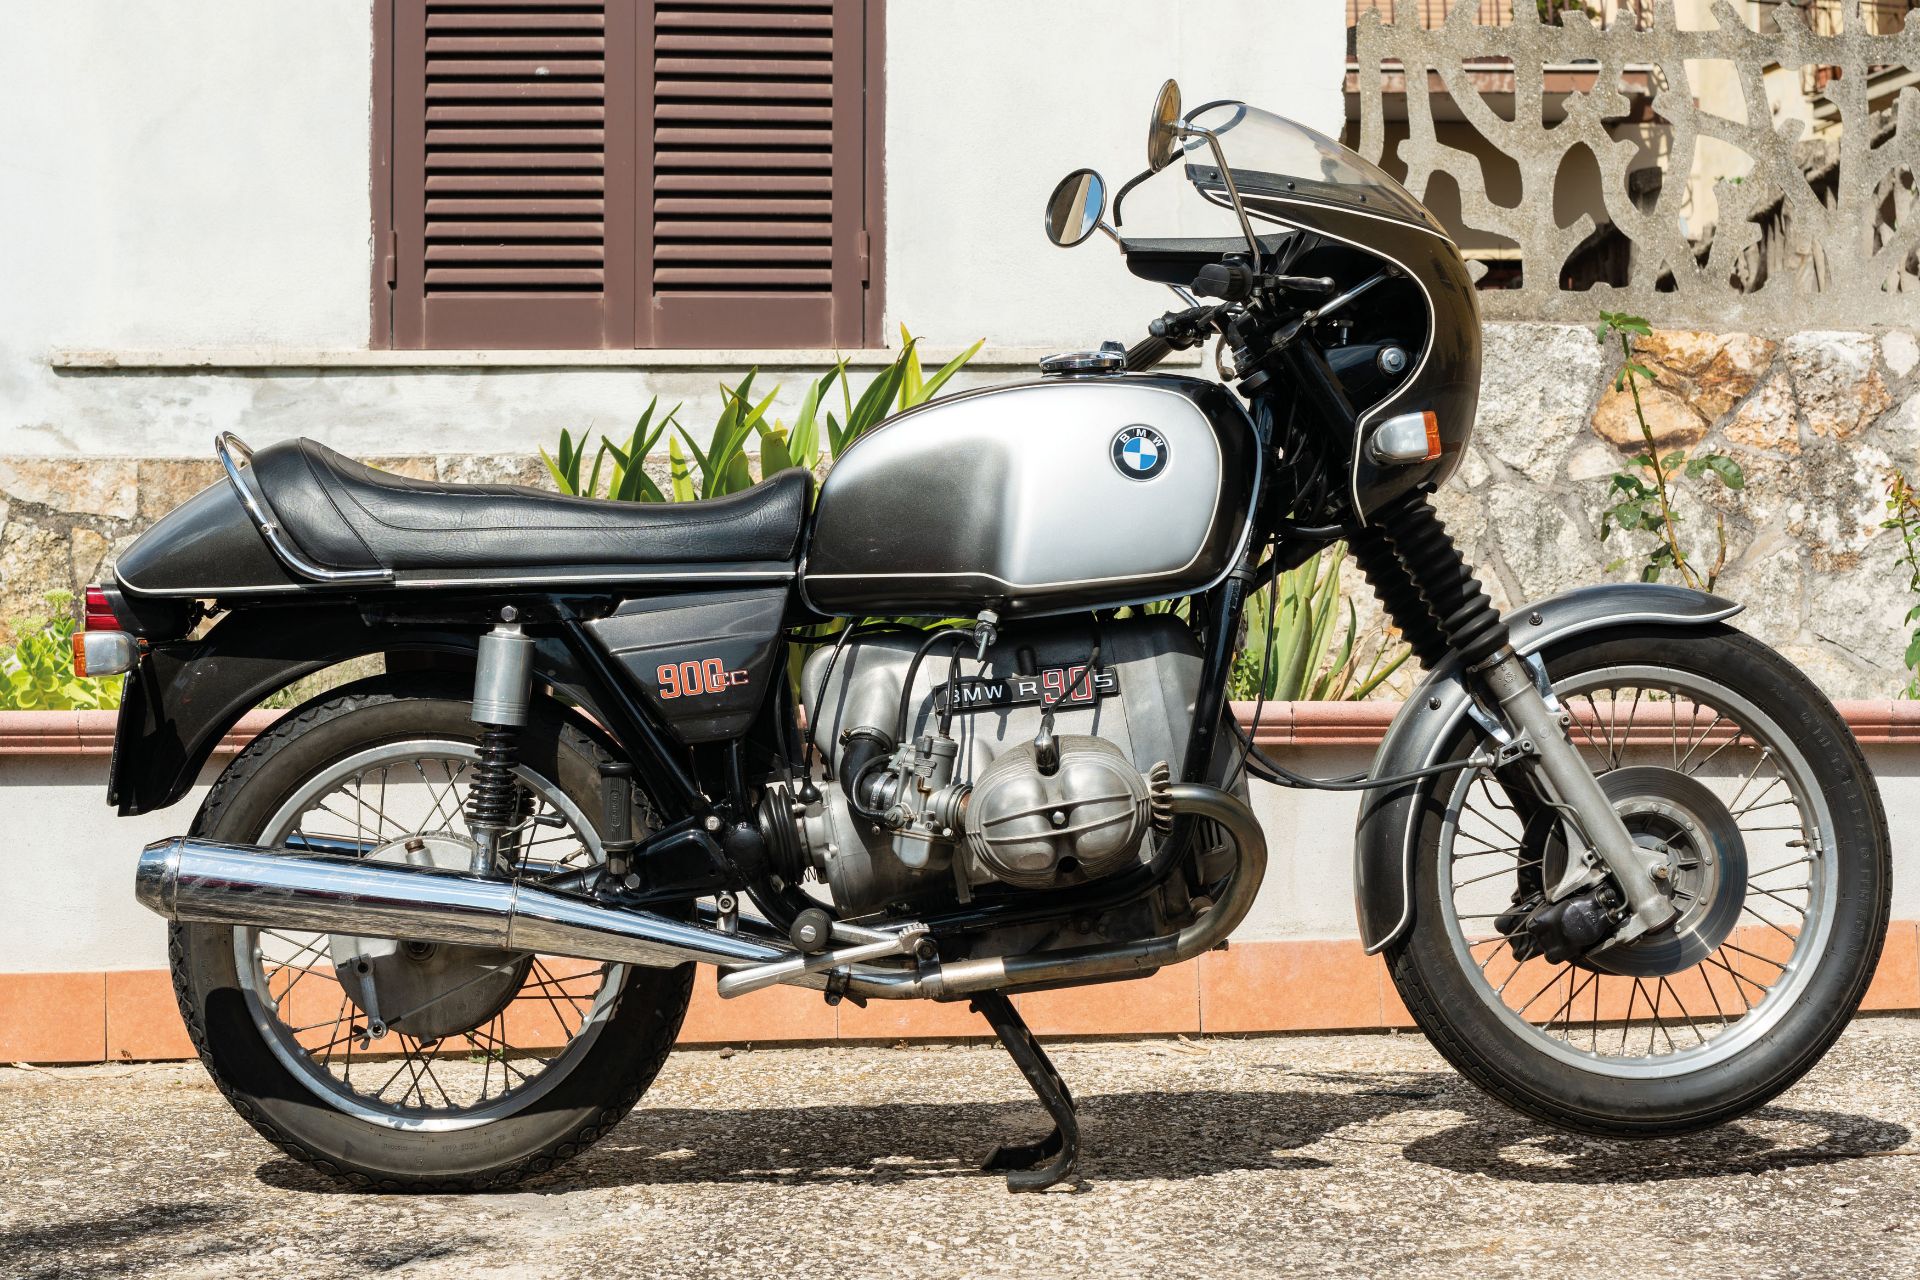 BMW R90 S, 1974 - Image 2 of 6